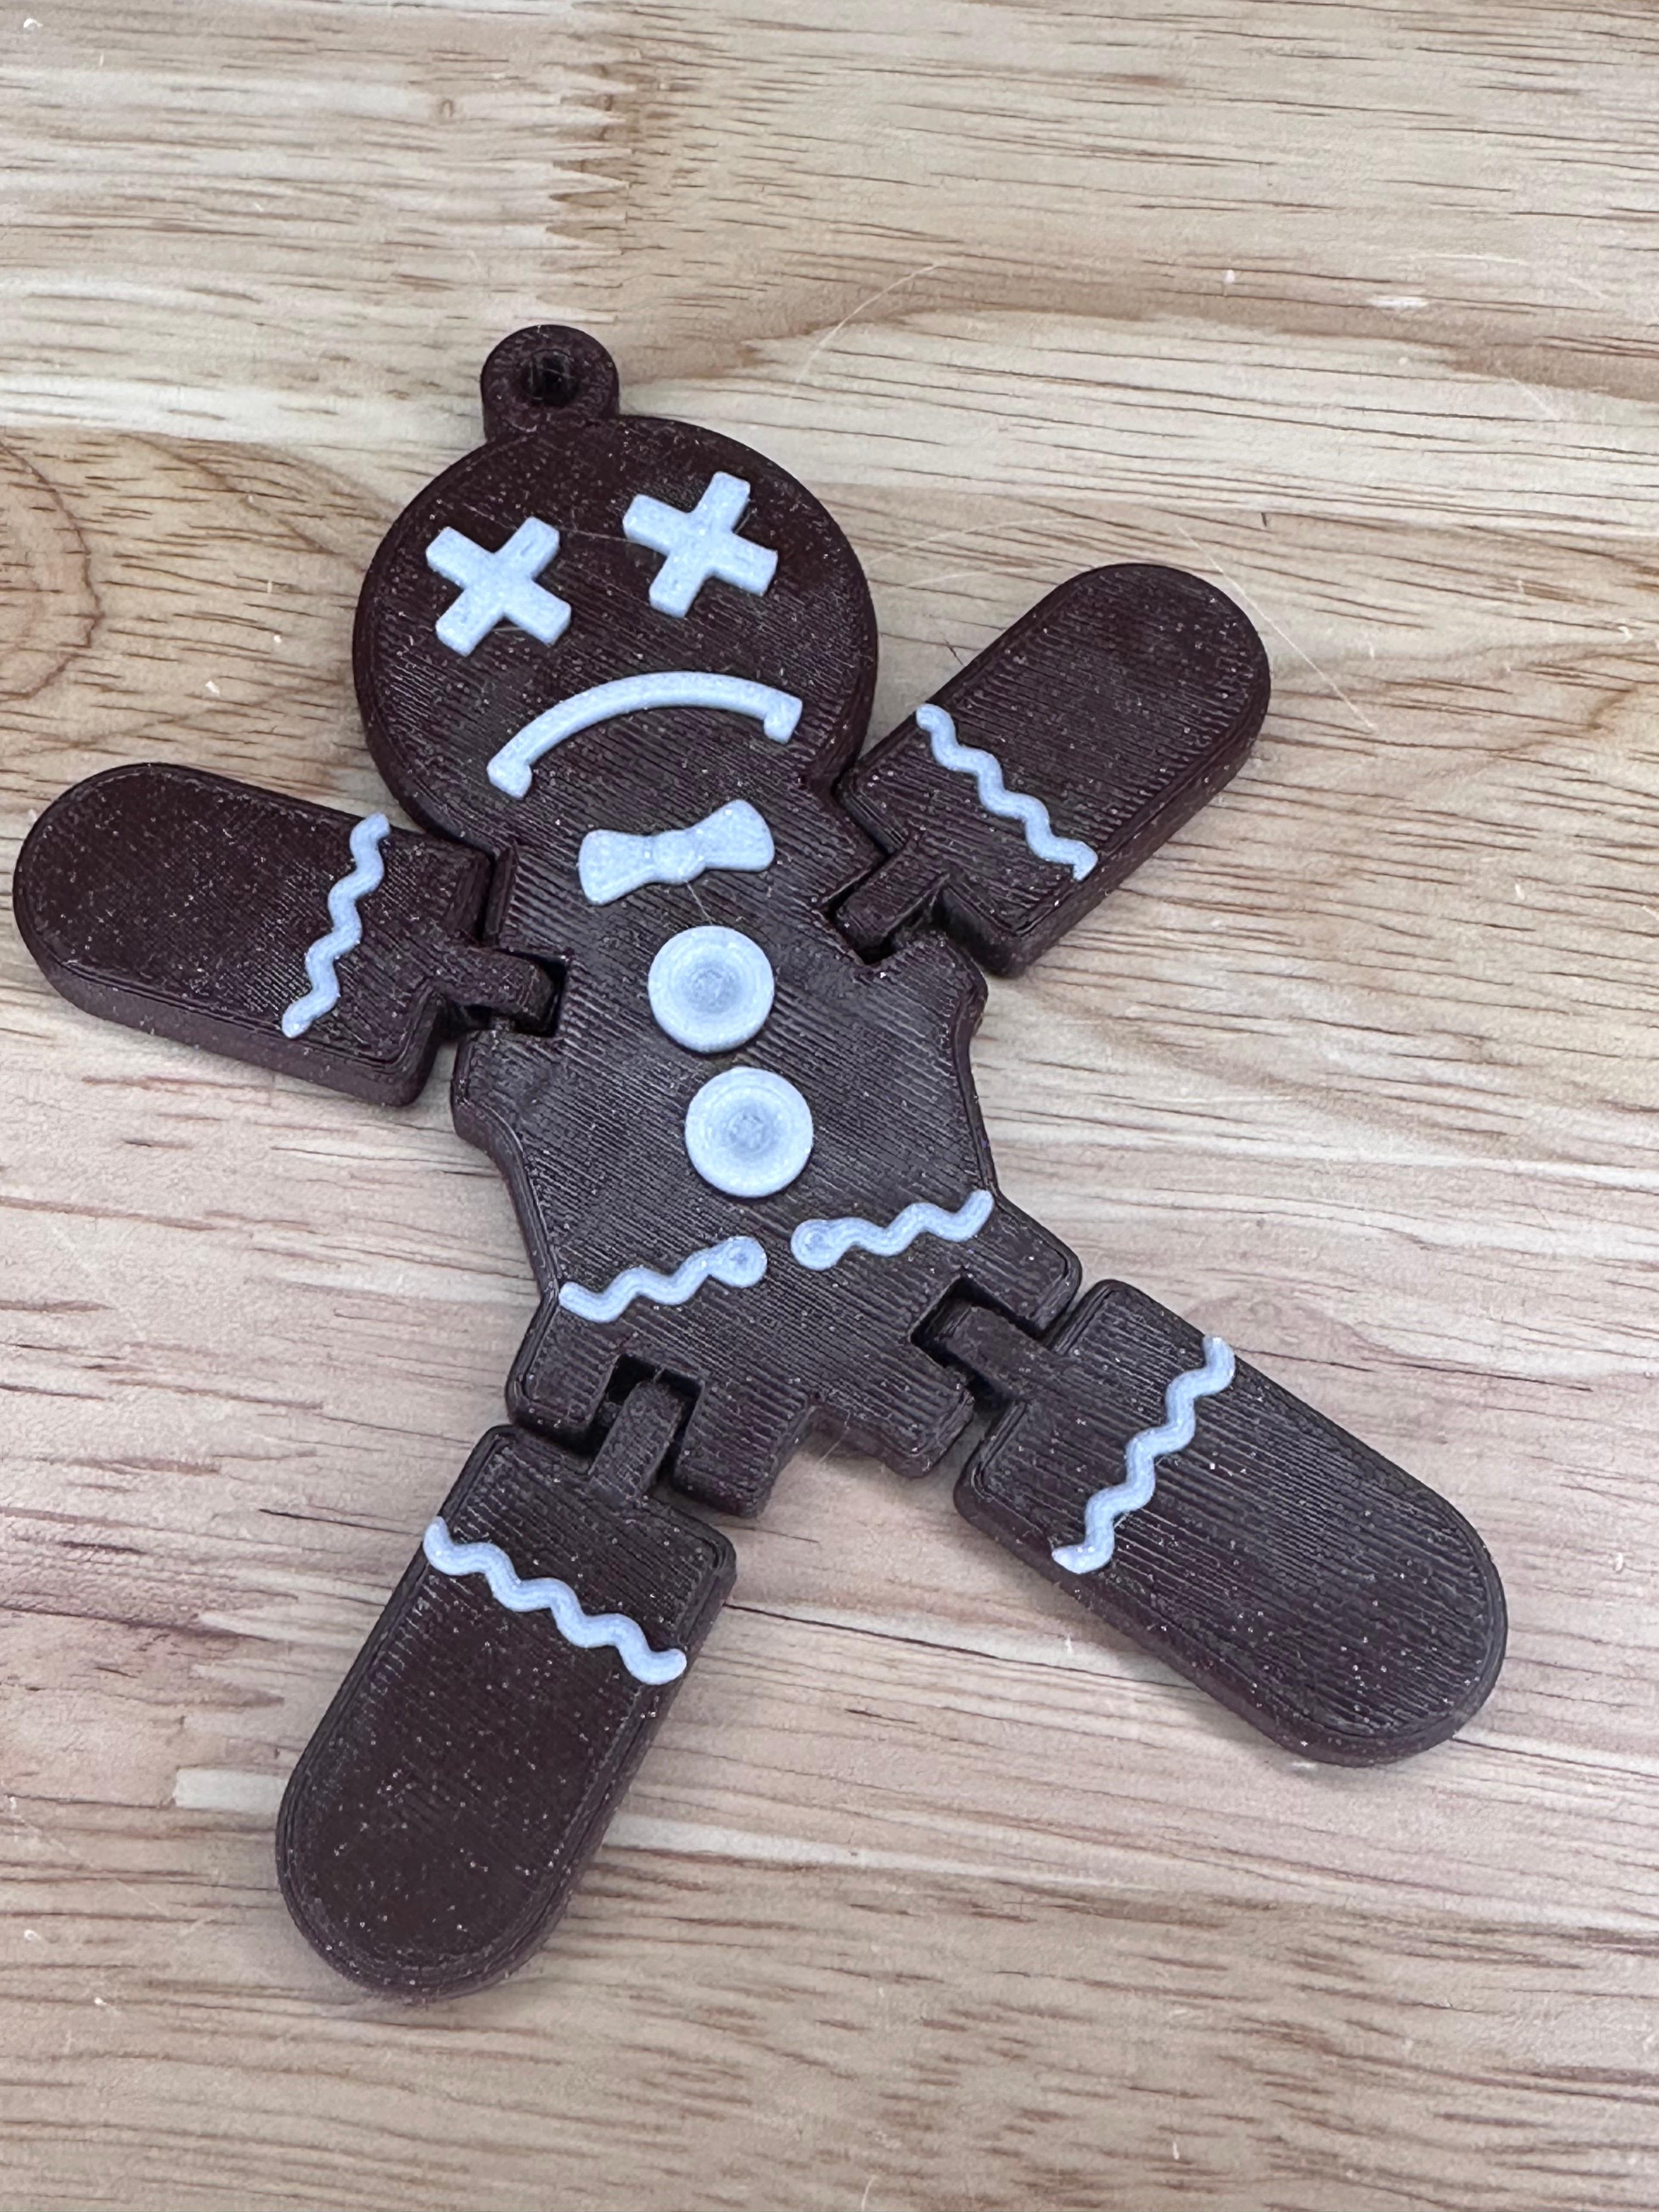 ARTICULATED GINGERBREAD MAN, PRINT IN PLACE, POSABLE, "DEAD GINGER" 3d model